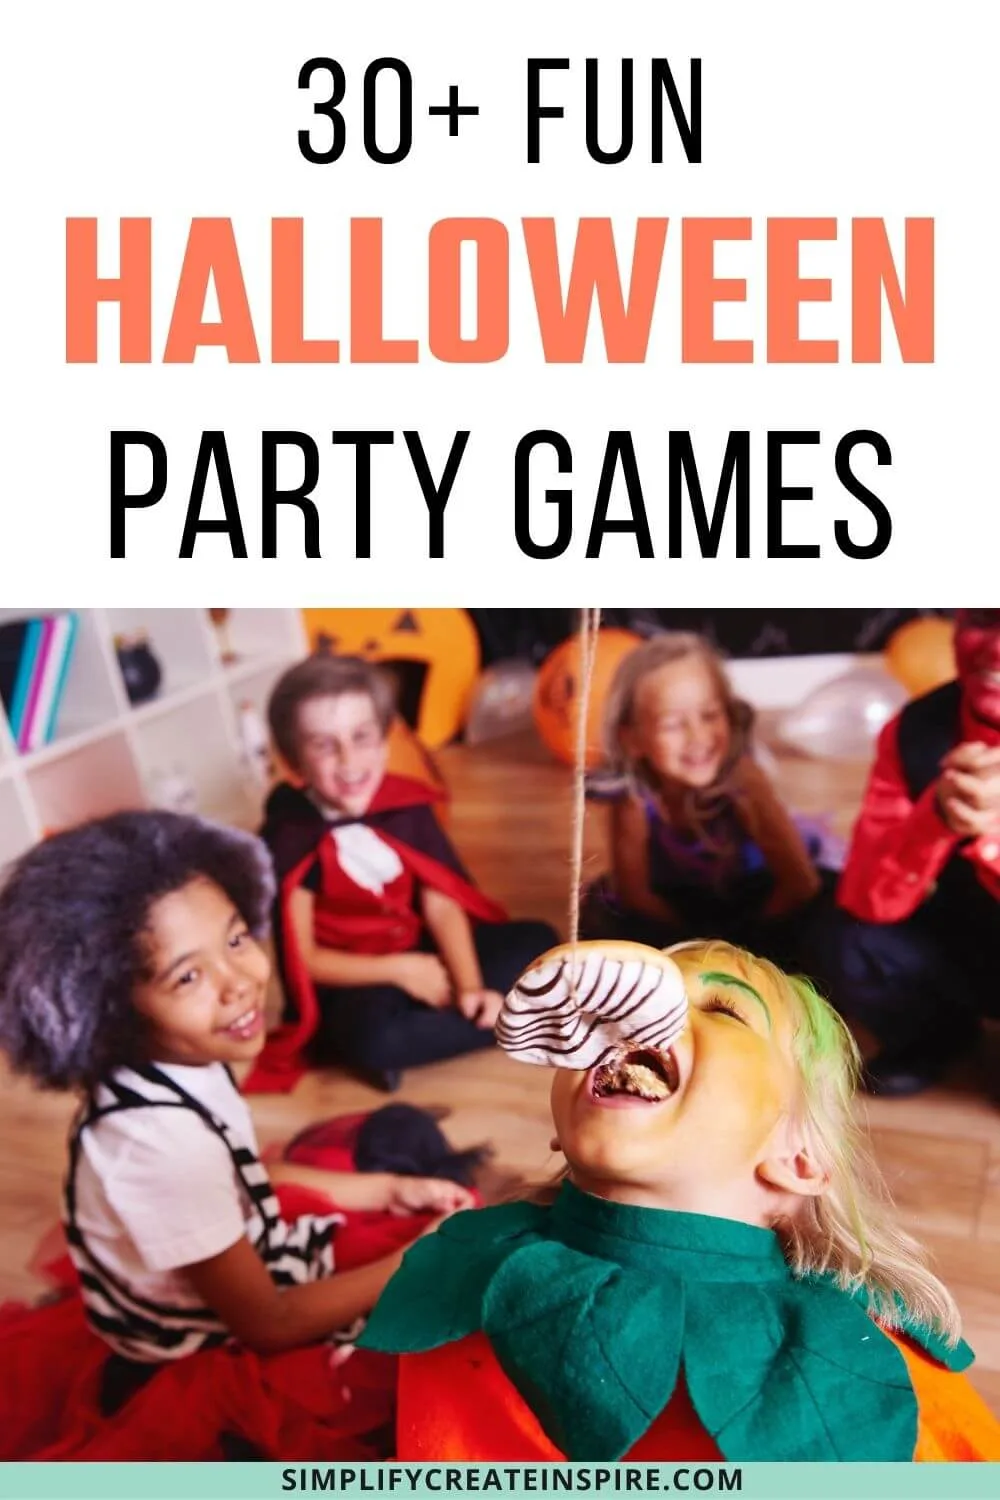 Fun halloween party games for all ages